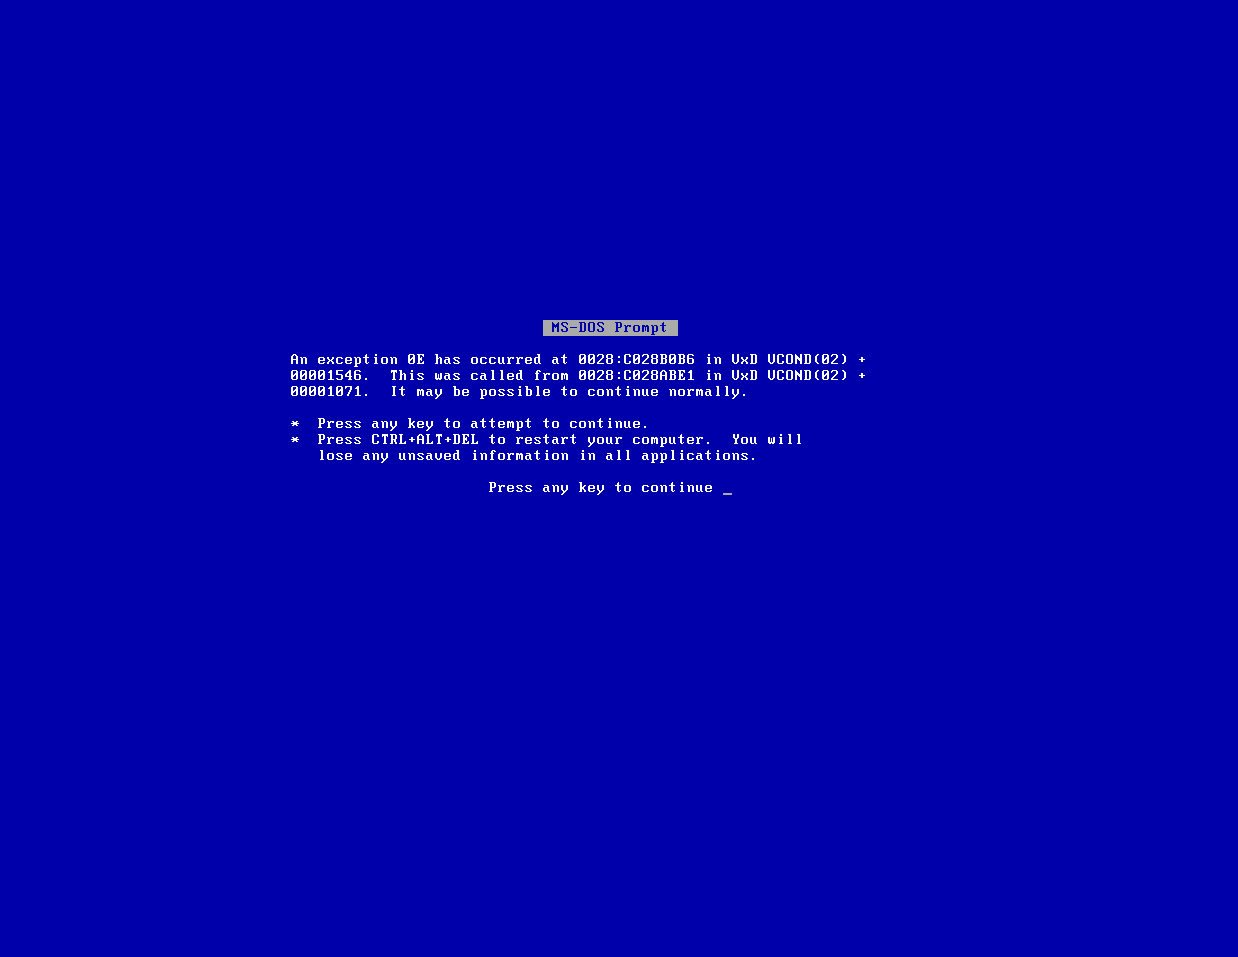 bsod background